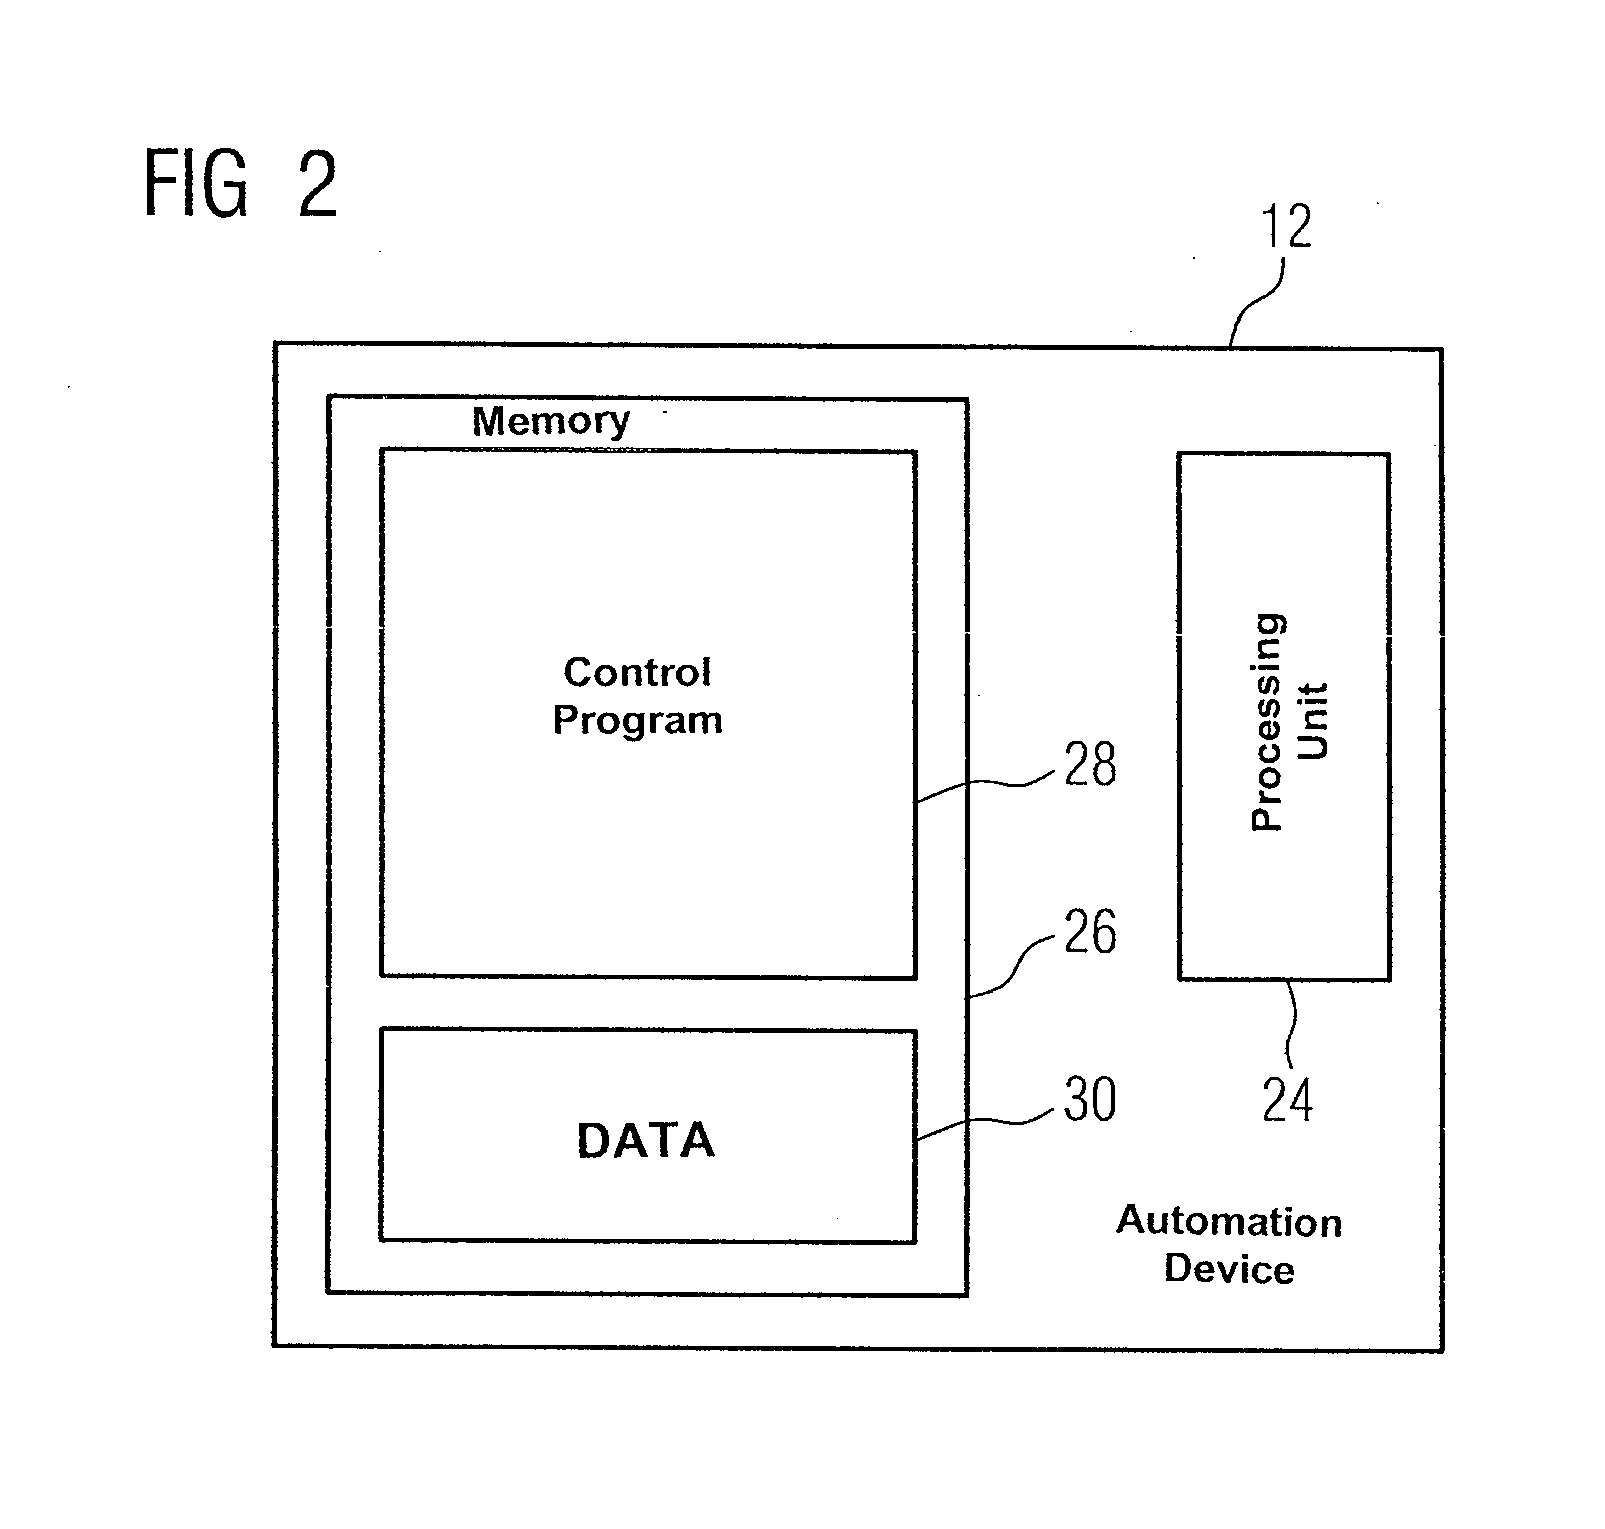 Method for Operating an Automation System